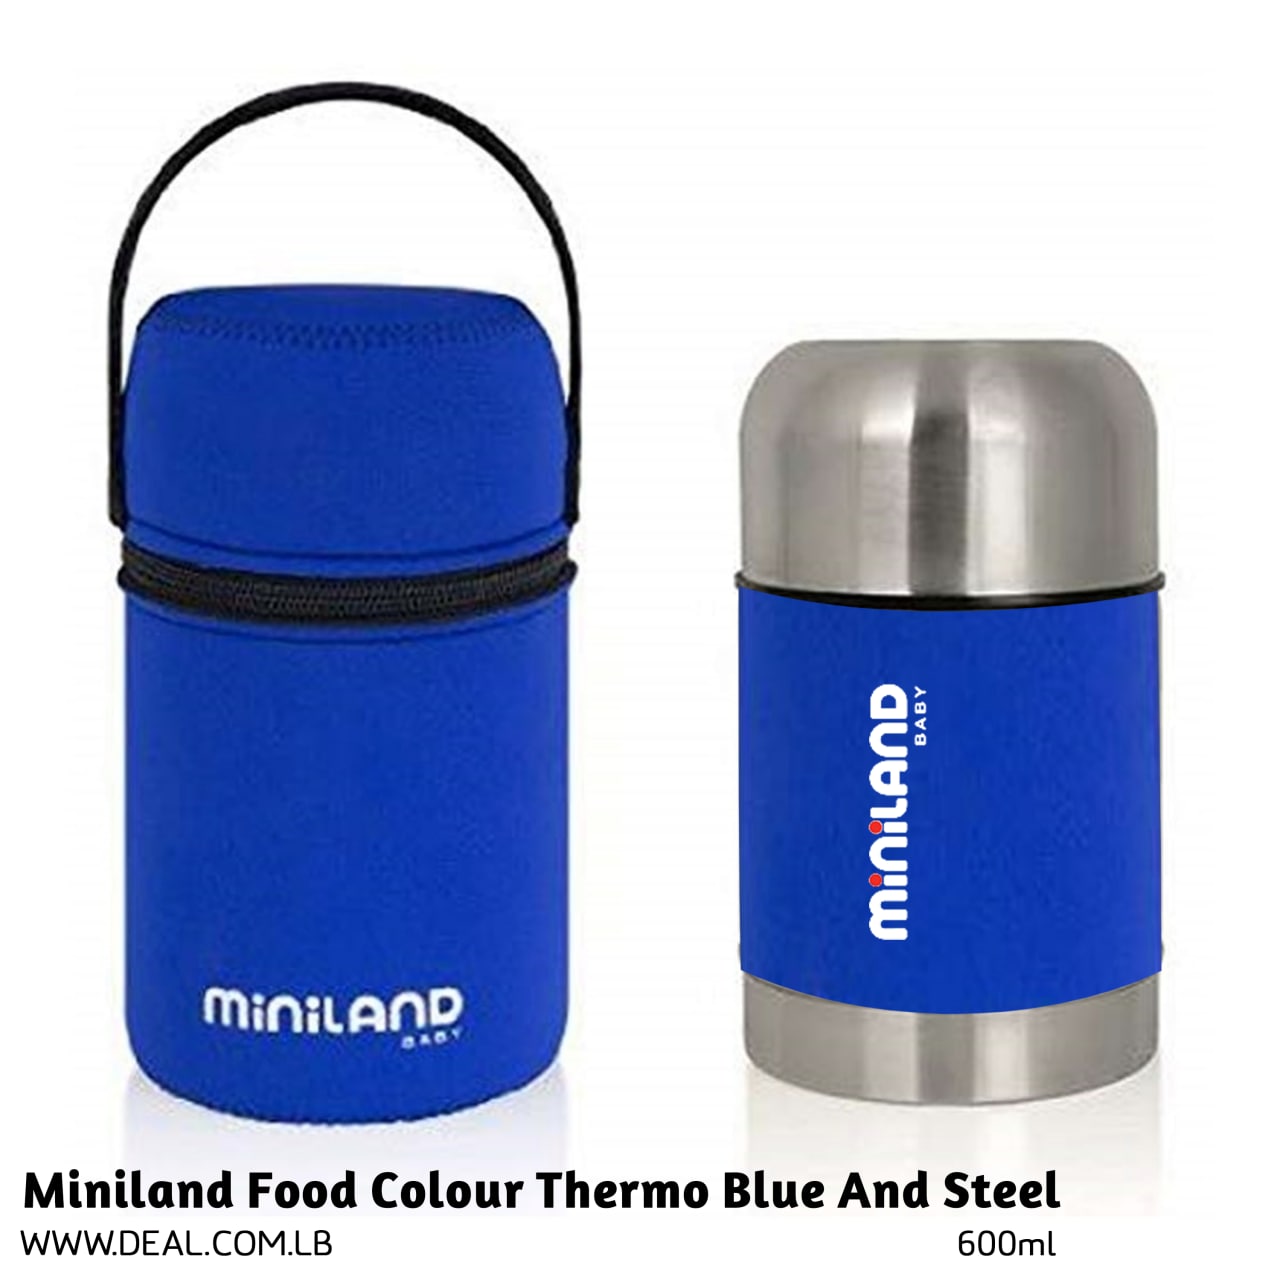 Miniland+Food+Color+Thermo+Blue+And+Steel